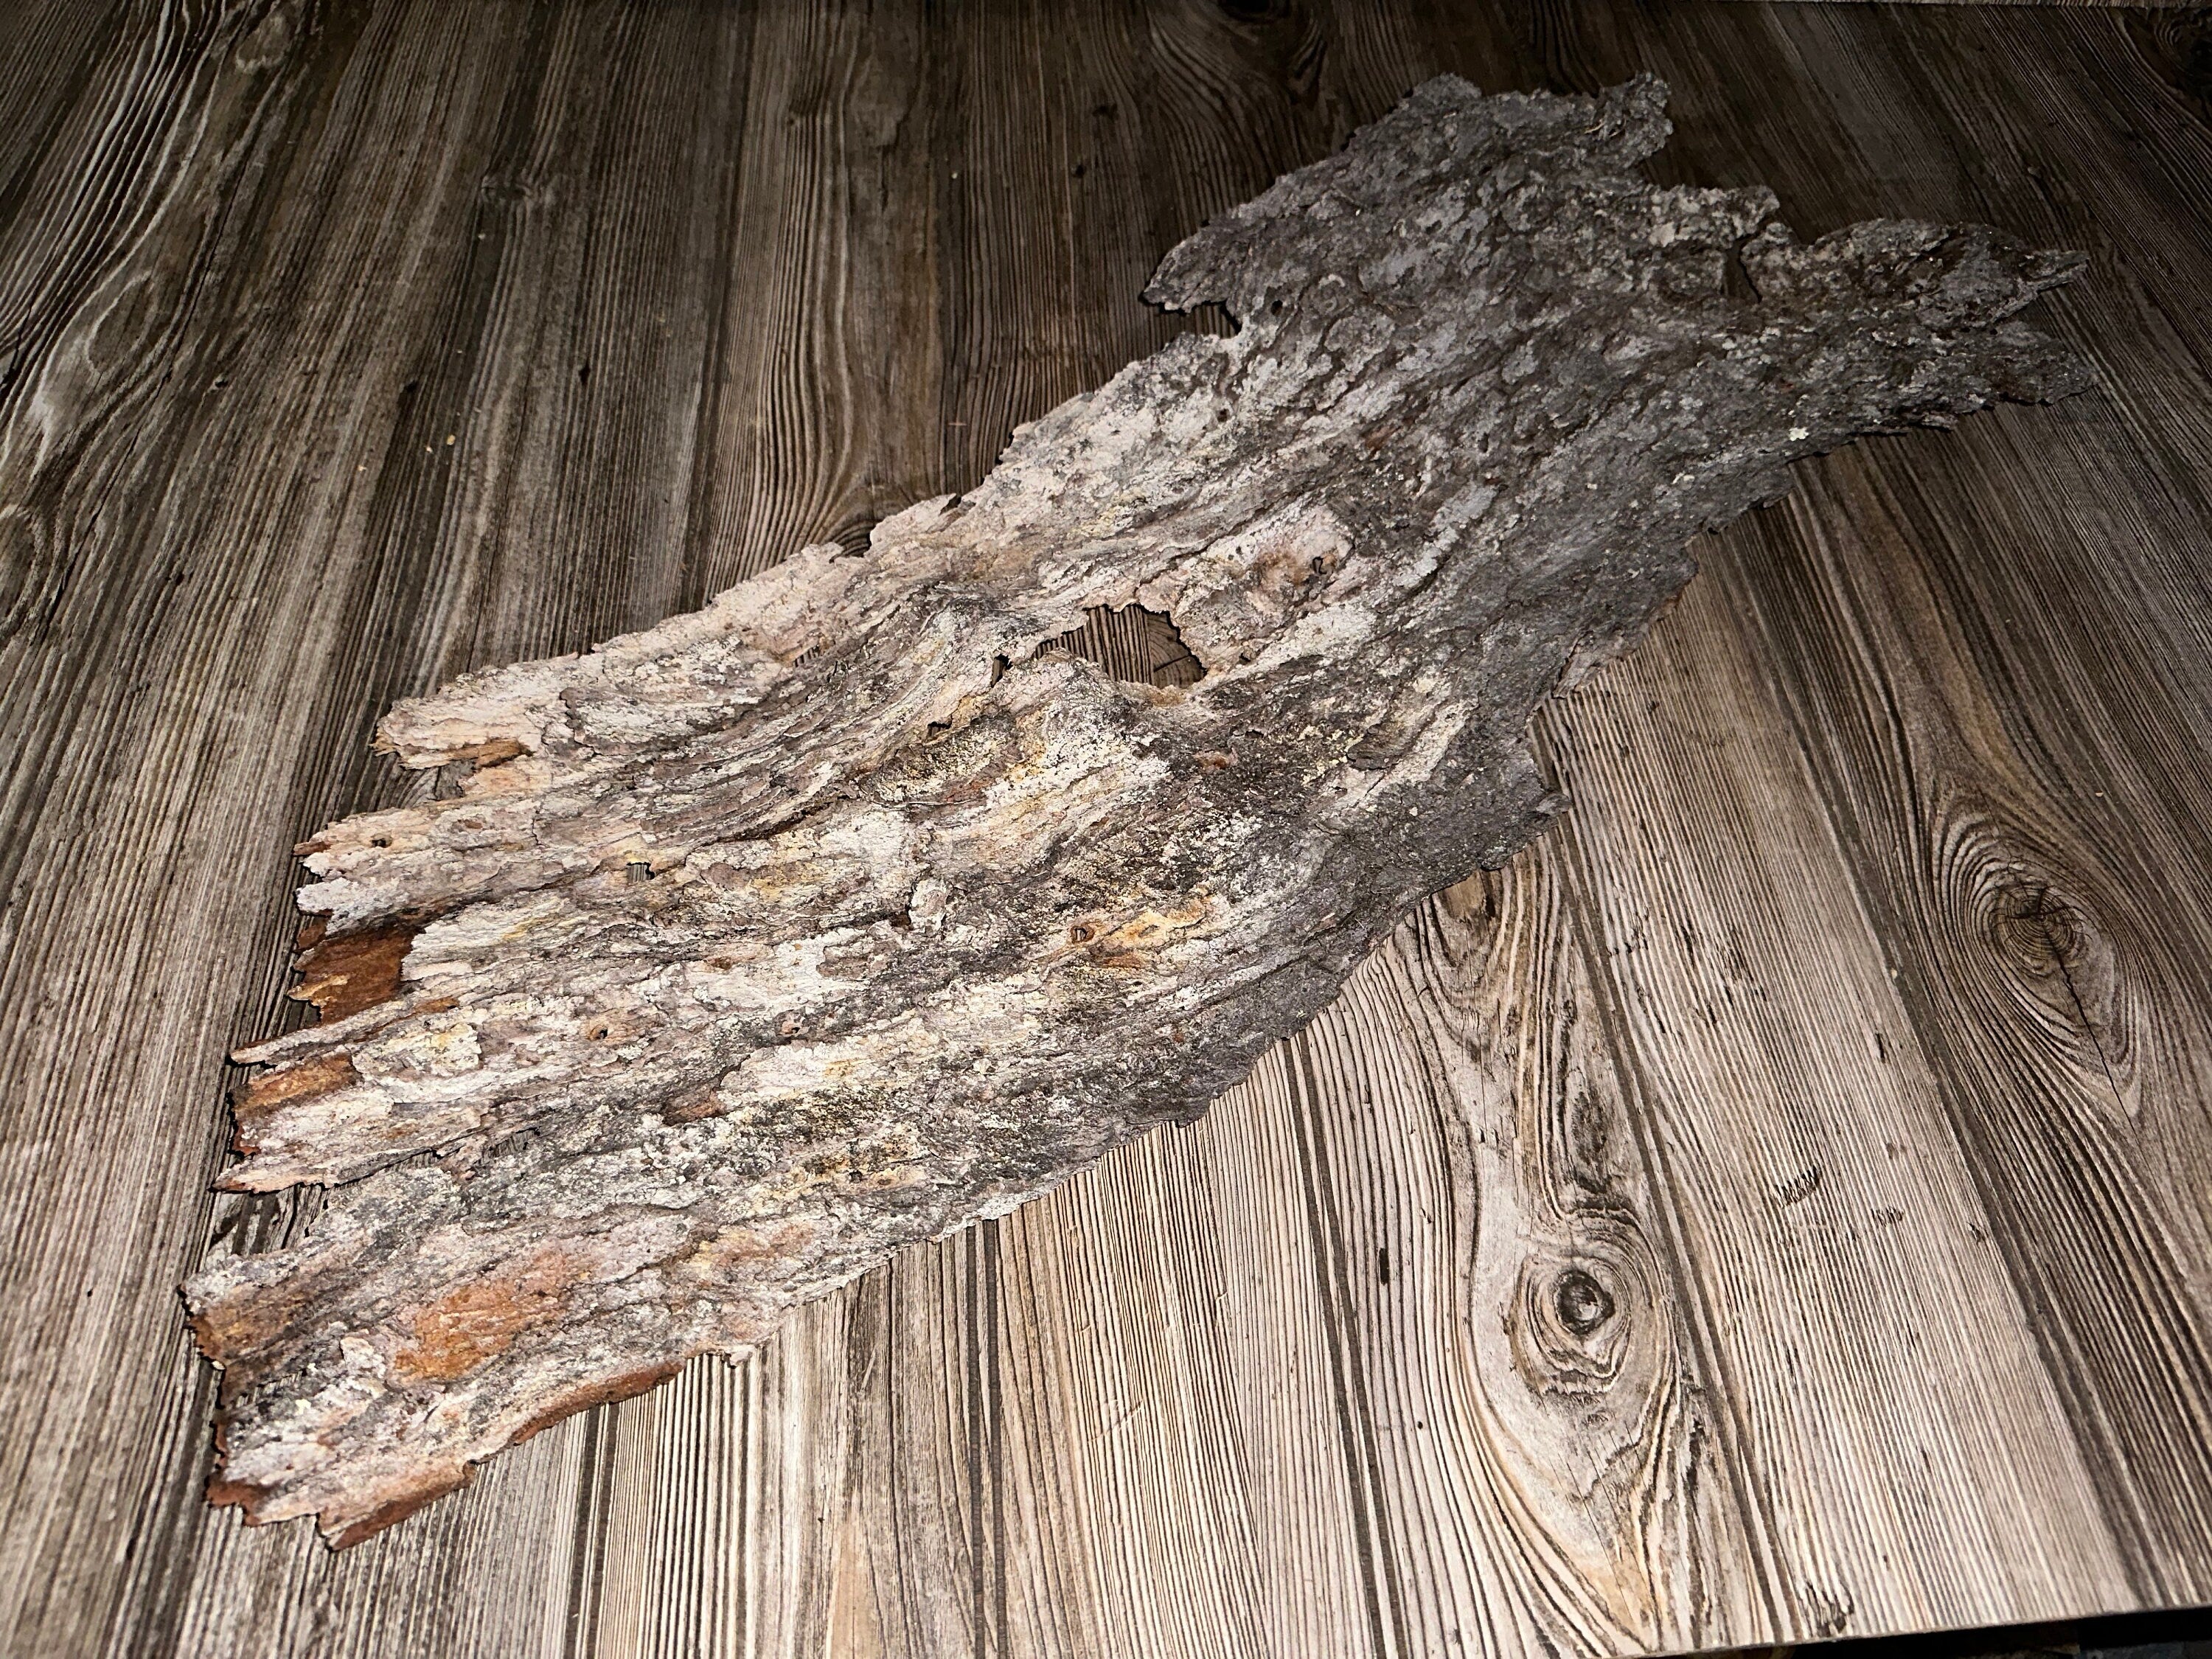 Tree Bark, Real Tree Bark, Gray-Brown Color, Approximately 30 Inches Long by 11 Inches Wide